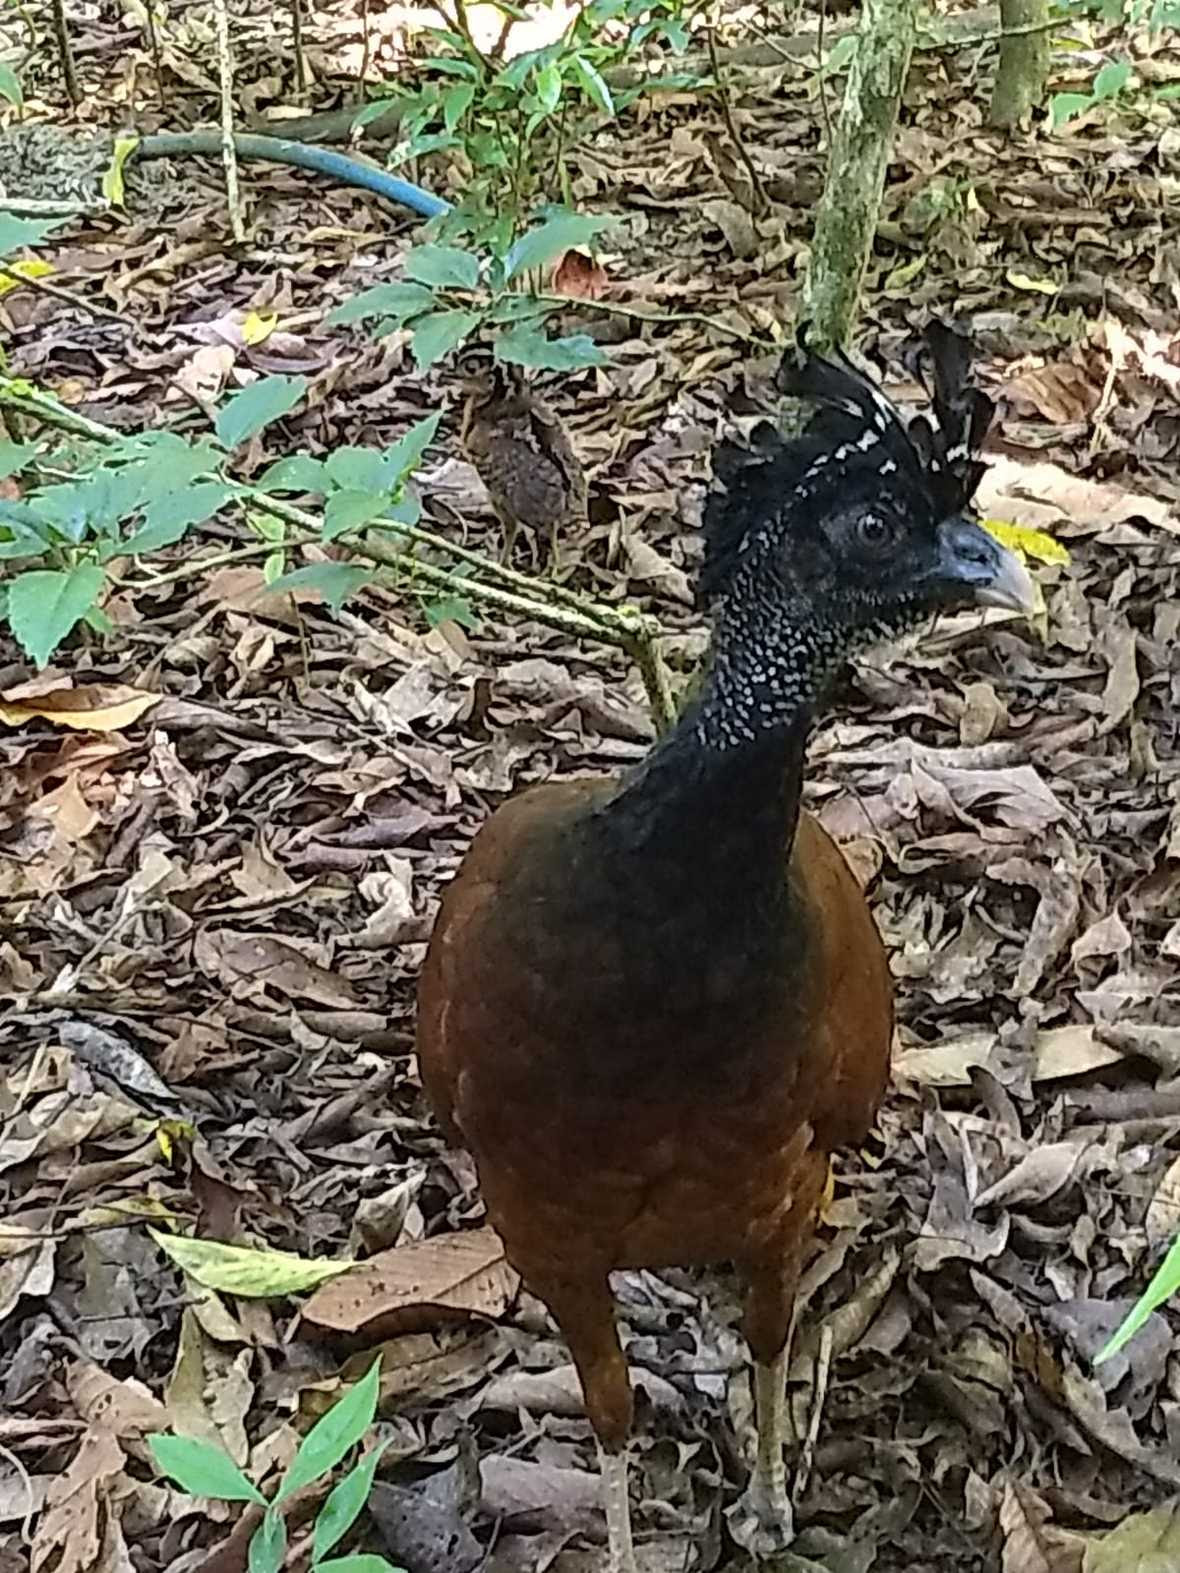 Great Curassow (large brown and black bird) on ground surrounded by foliage and dead leaves with baby camouflaged behind her